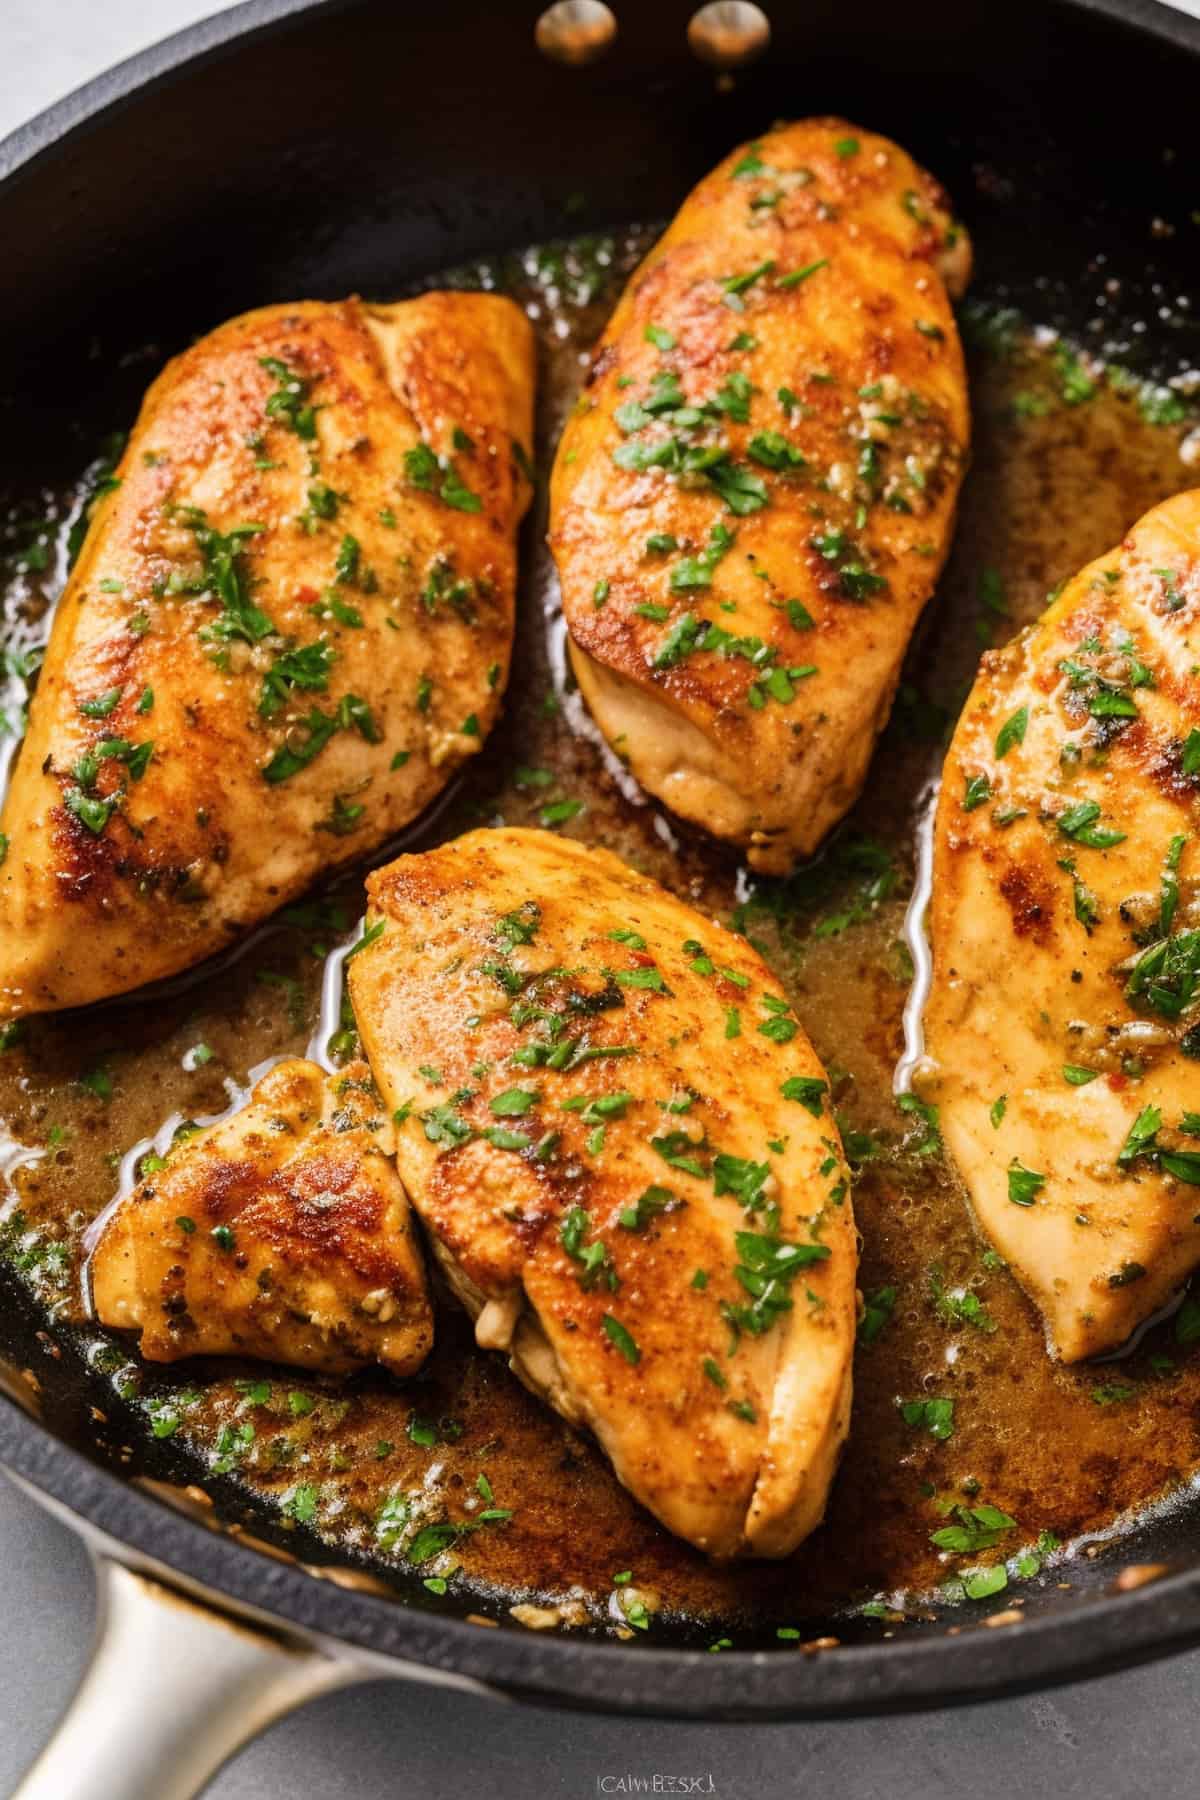 Seared chicken in a frying pan.